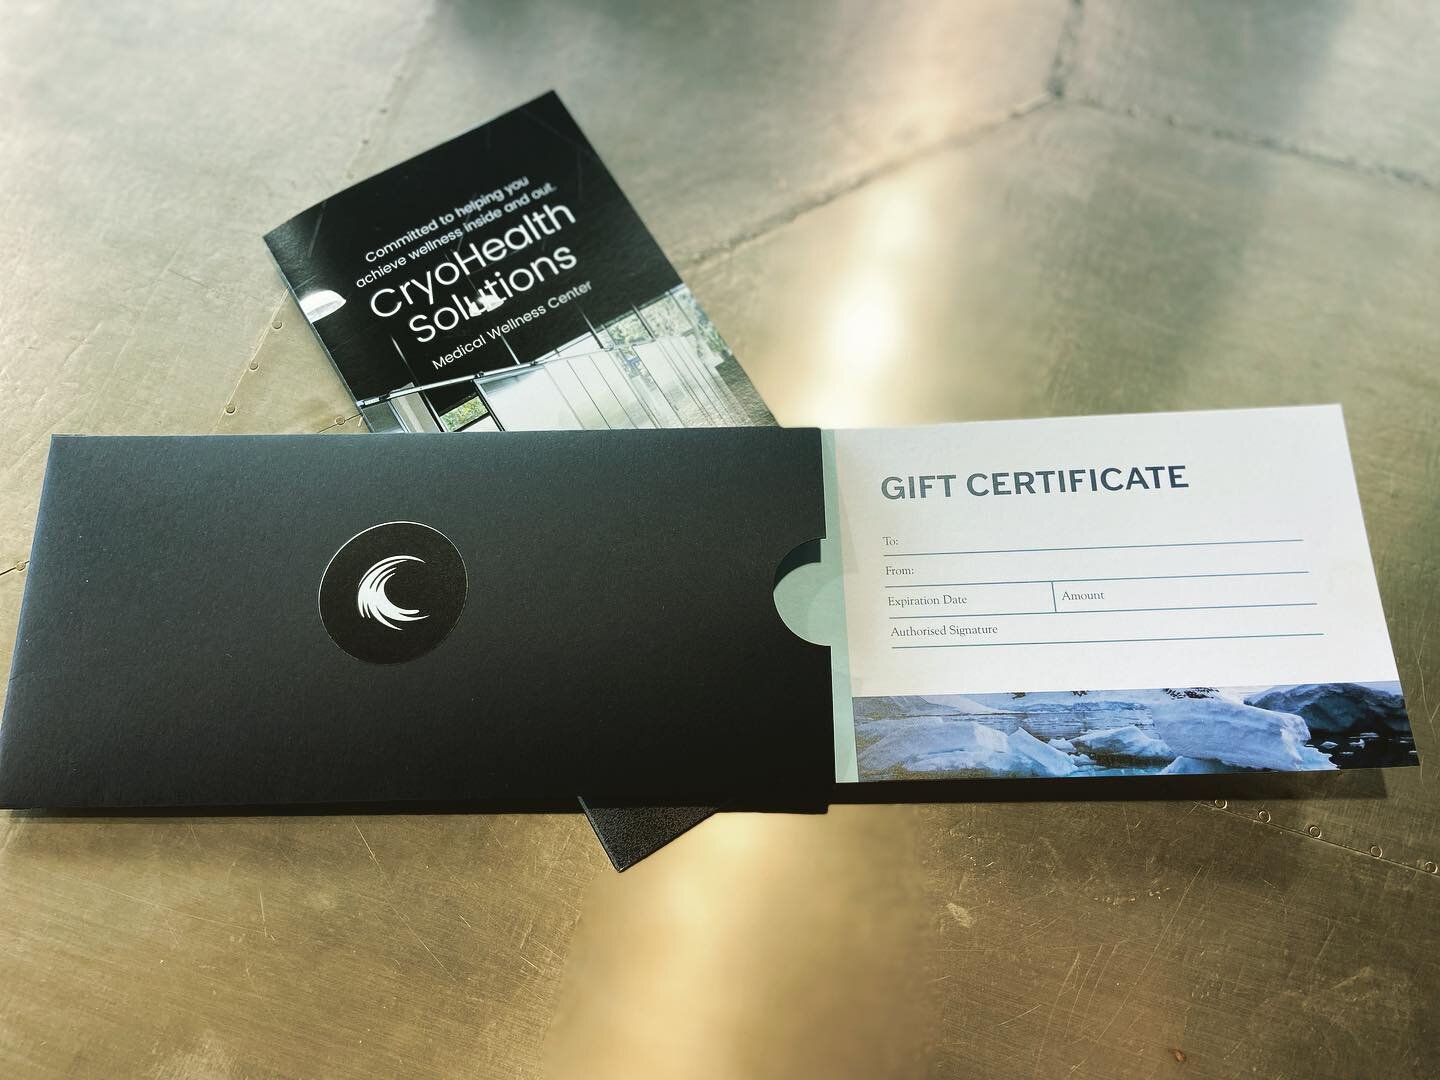 The gift giving season is upon us 🎁
Looking for the &lsquo;Coolest&rsquo; gift on earth? Give the gift of Health this year with a Gift Certificate from Cryo Health Solutions ✨

Learn more about the services we offer. 
Link🔗 in bio

#cryotherapy#fit